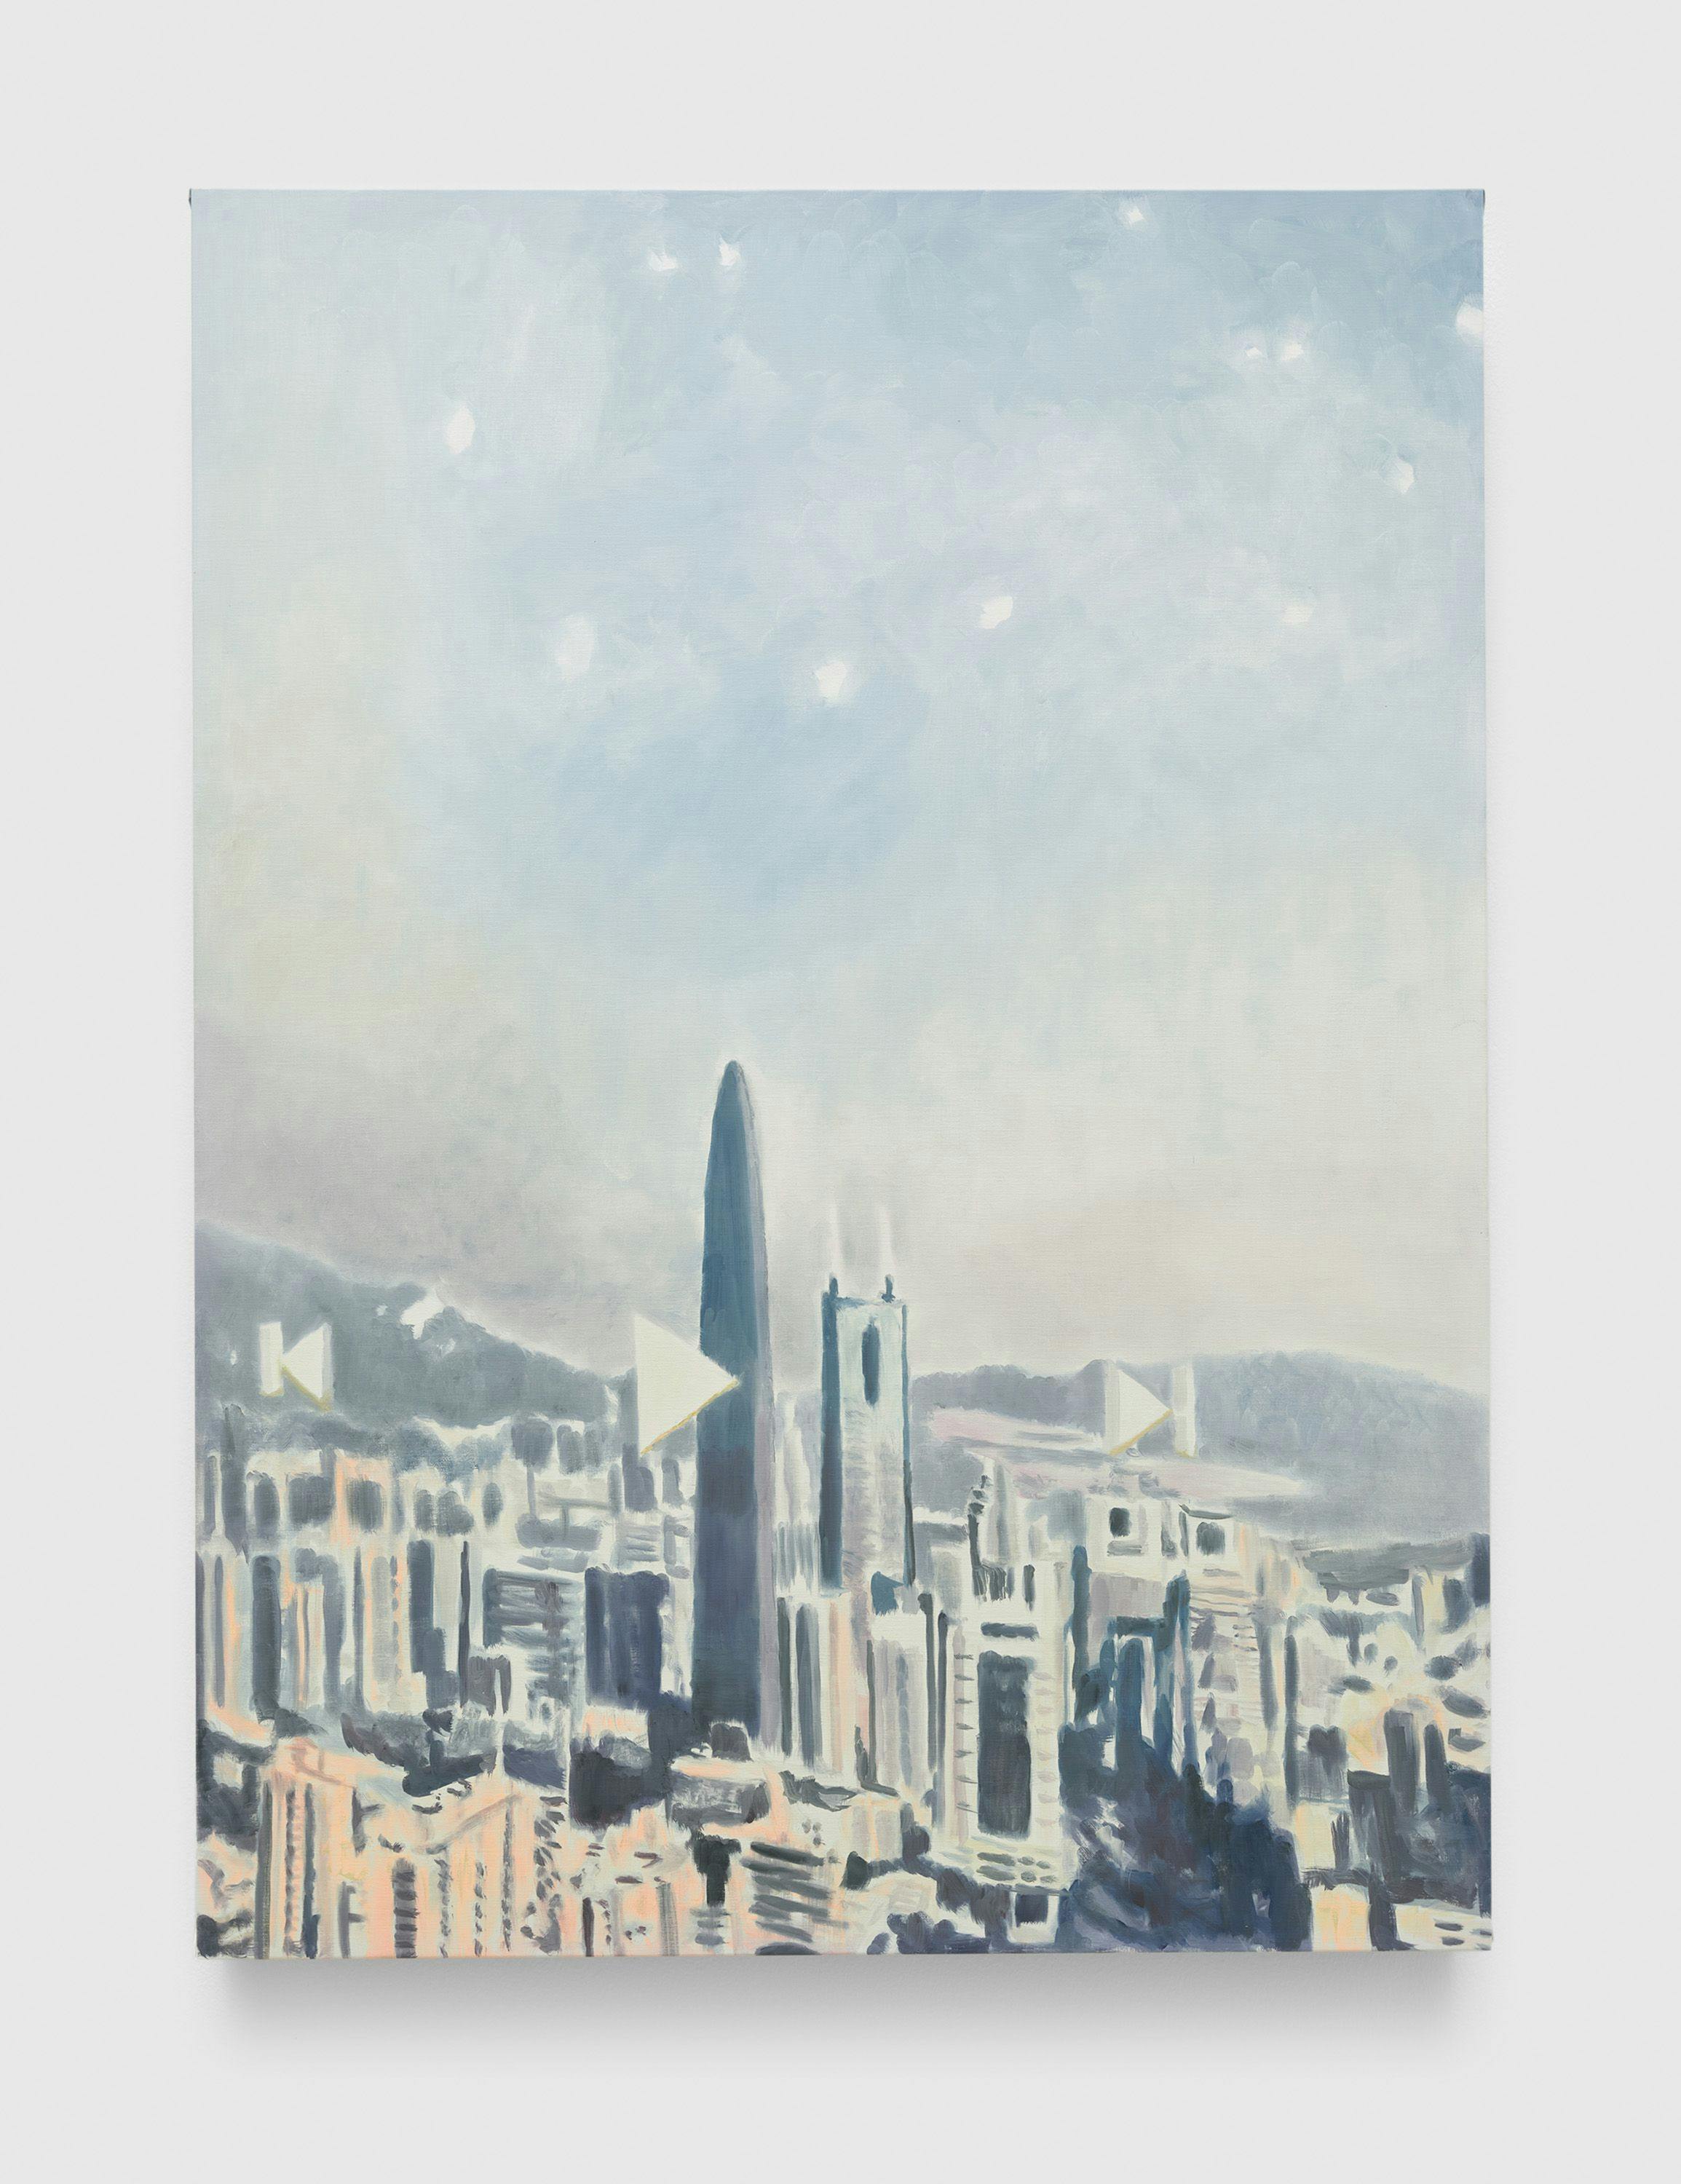 A painting by Luc Tuymans, titled Shenzhen, dated 2019.